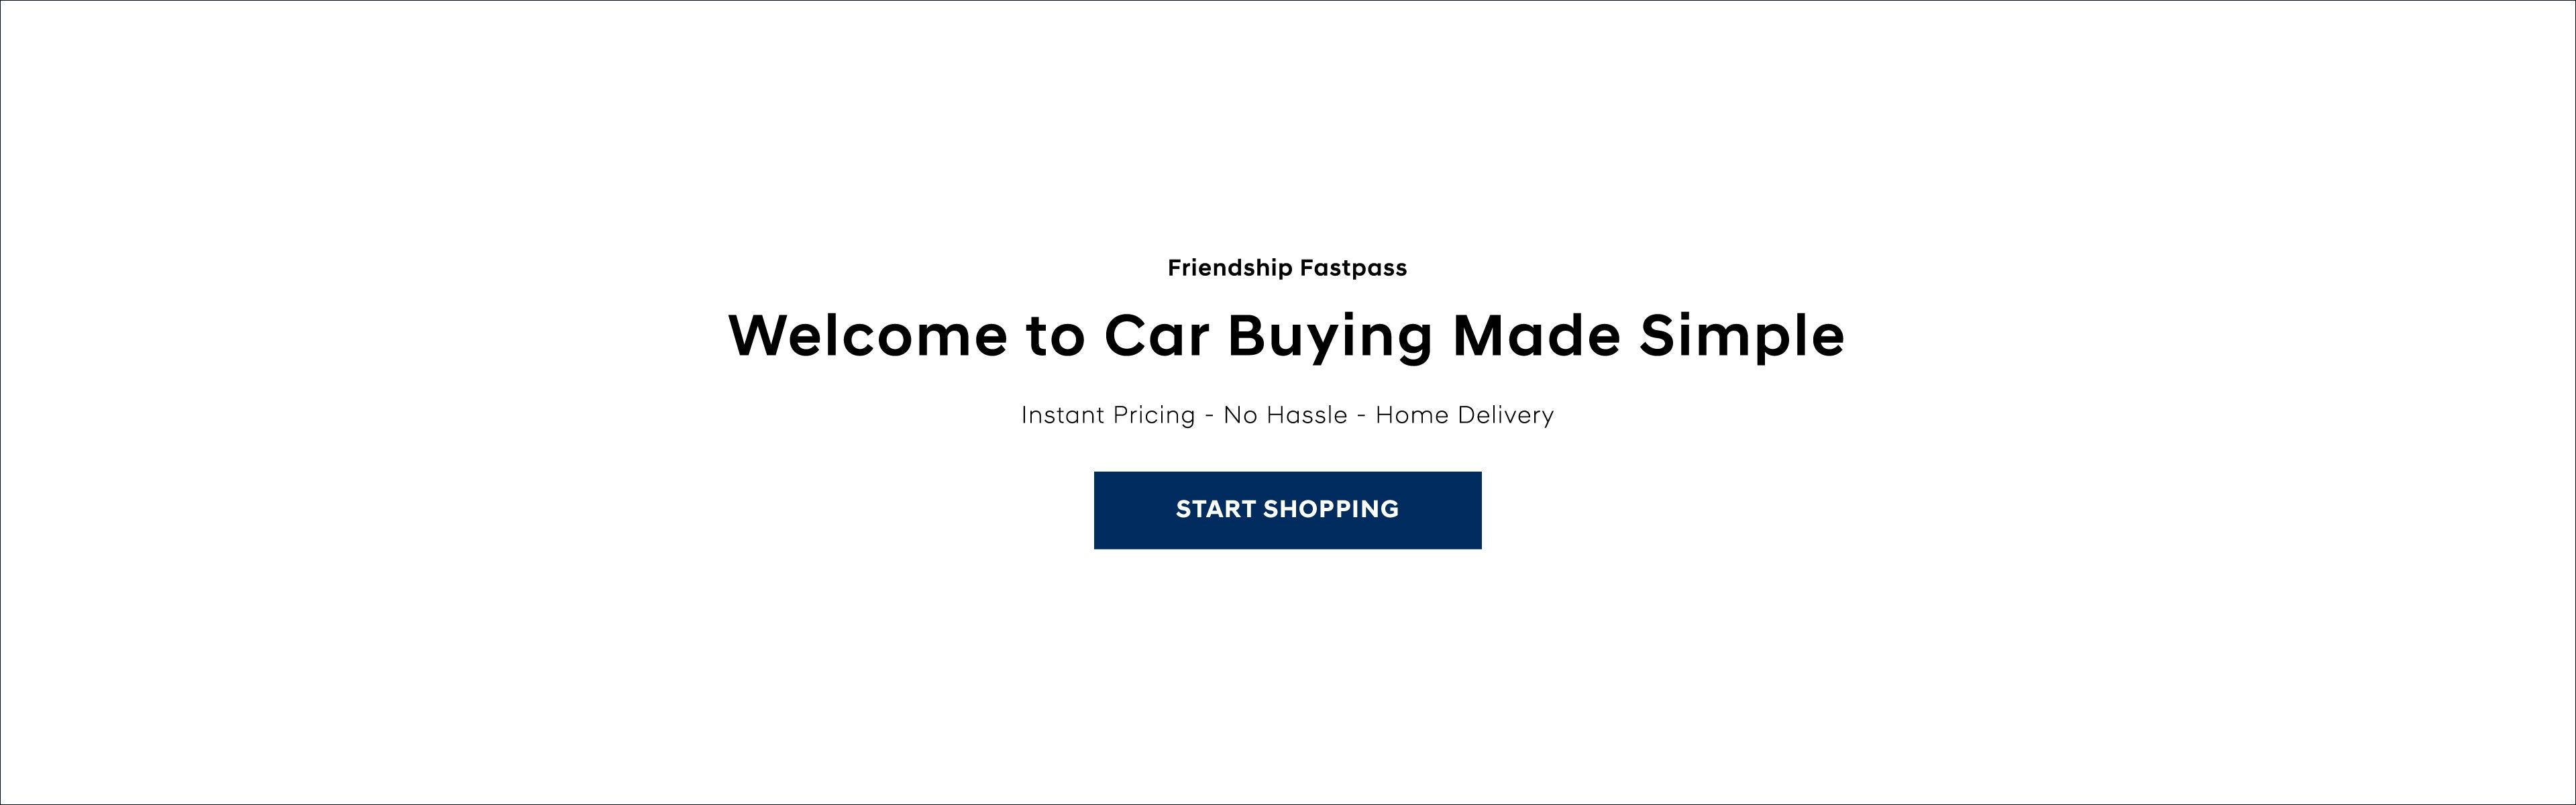 Welcome To Car Buying Made Simple